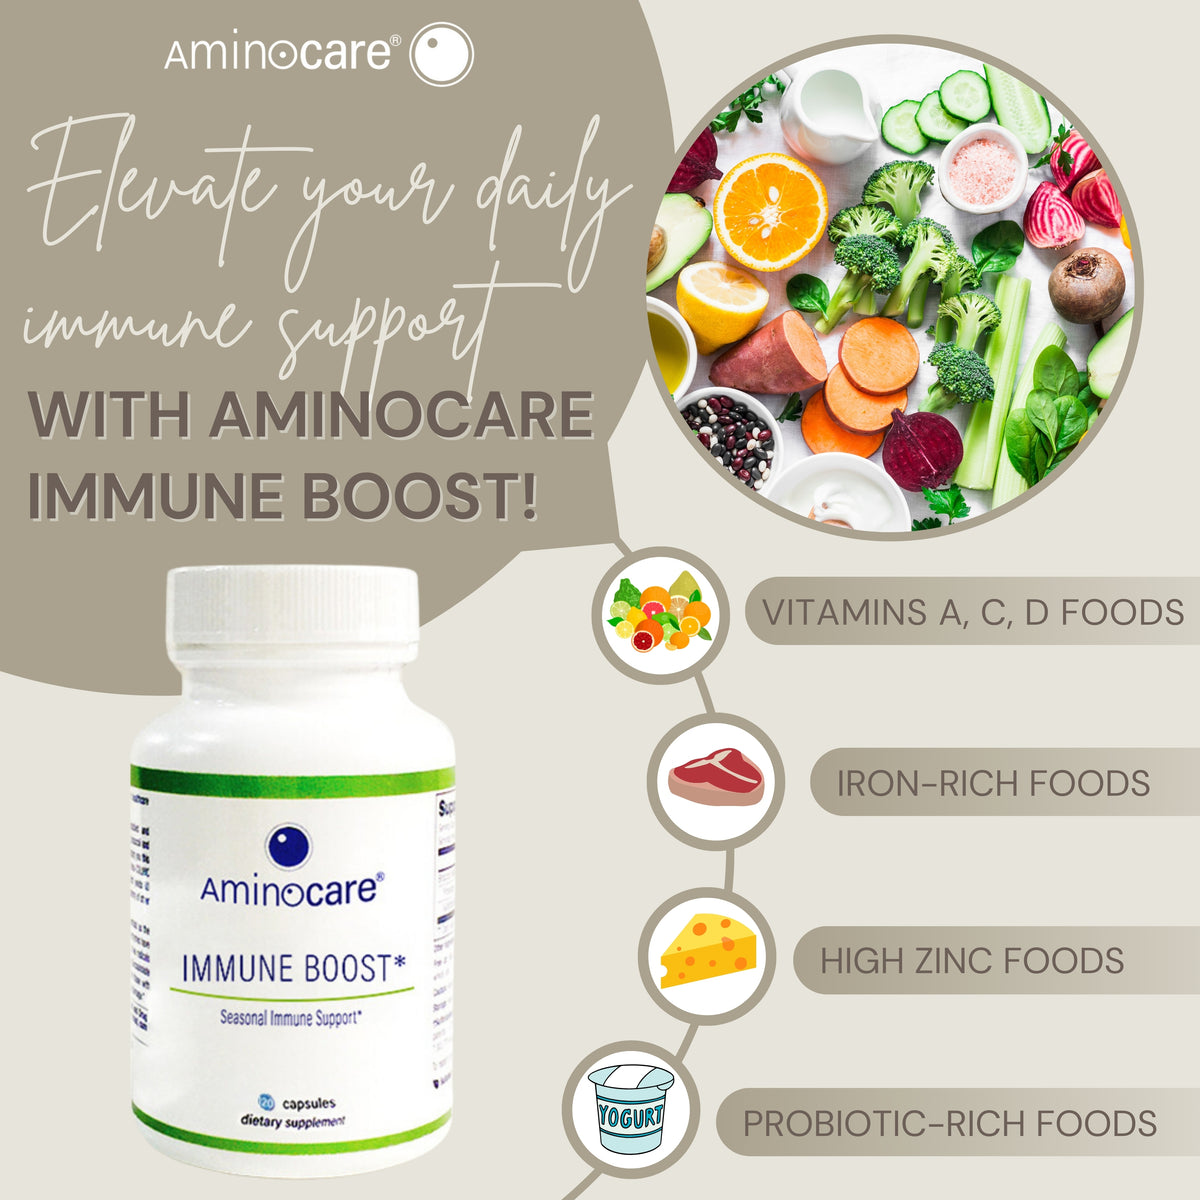 Elevate Your Daily Immune Support with Aminocare and a Healthy Diet